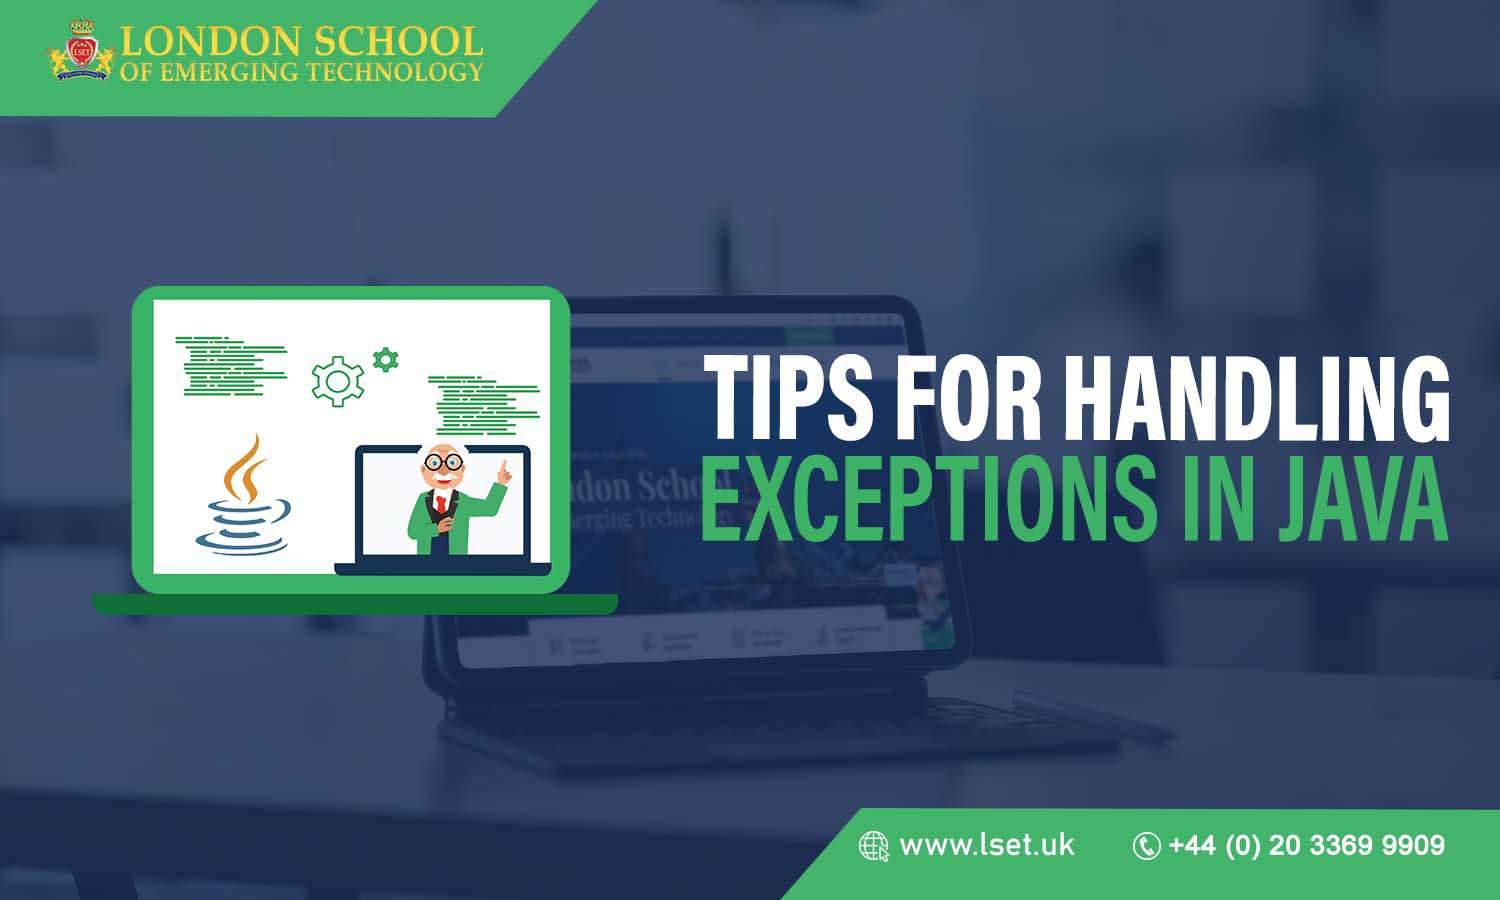 Tips for Handling Exceptions in Java